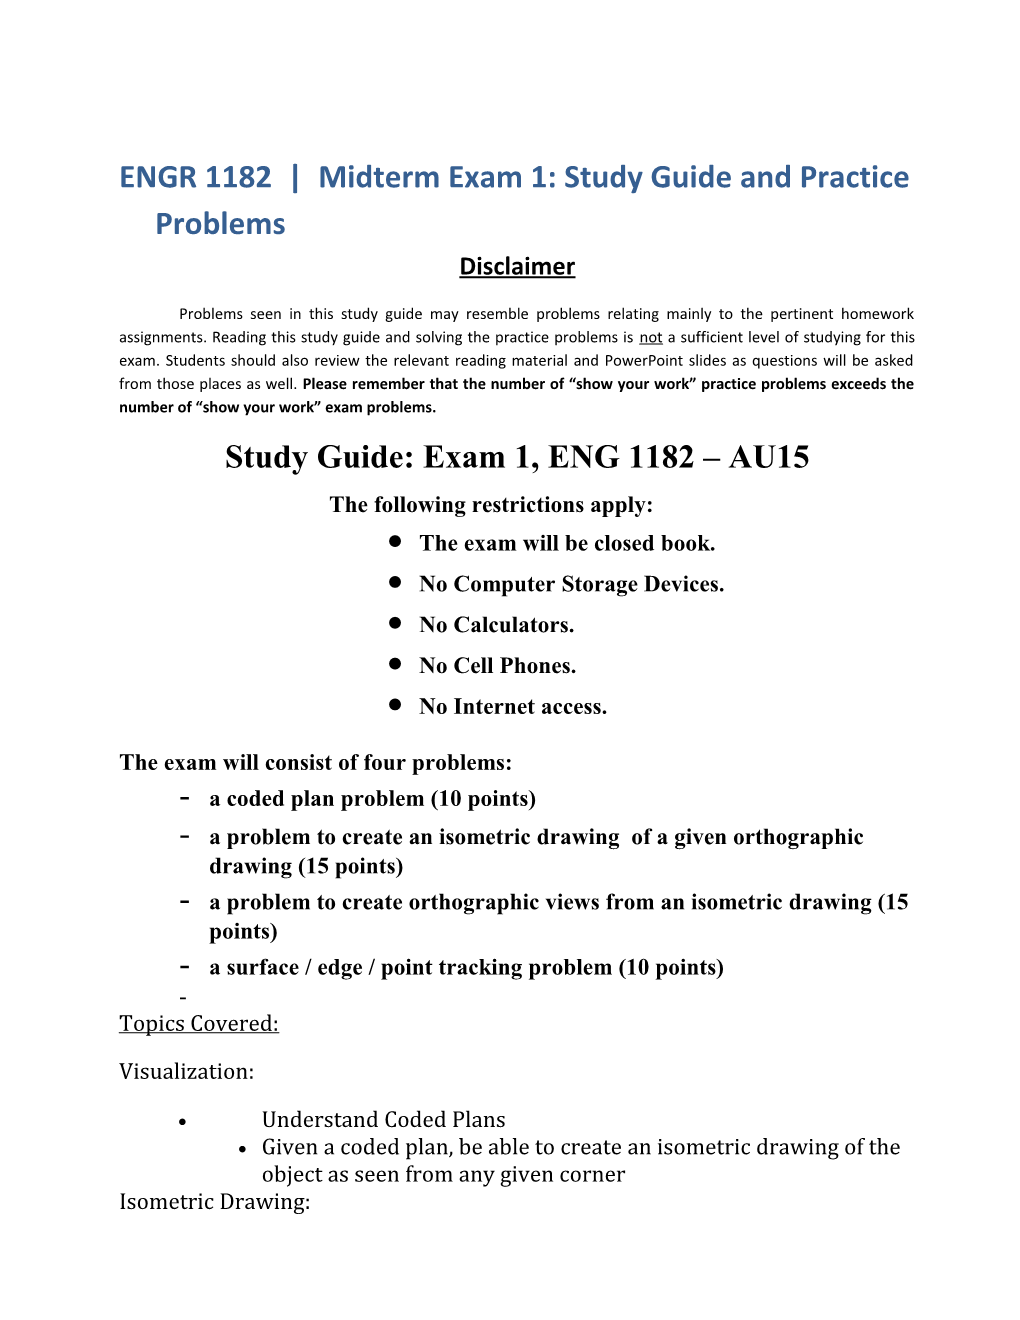 ENGR 1182 Midterm Exam 1: Study Guide and Practice Problems